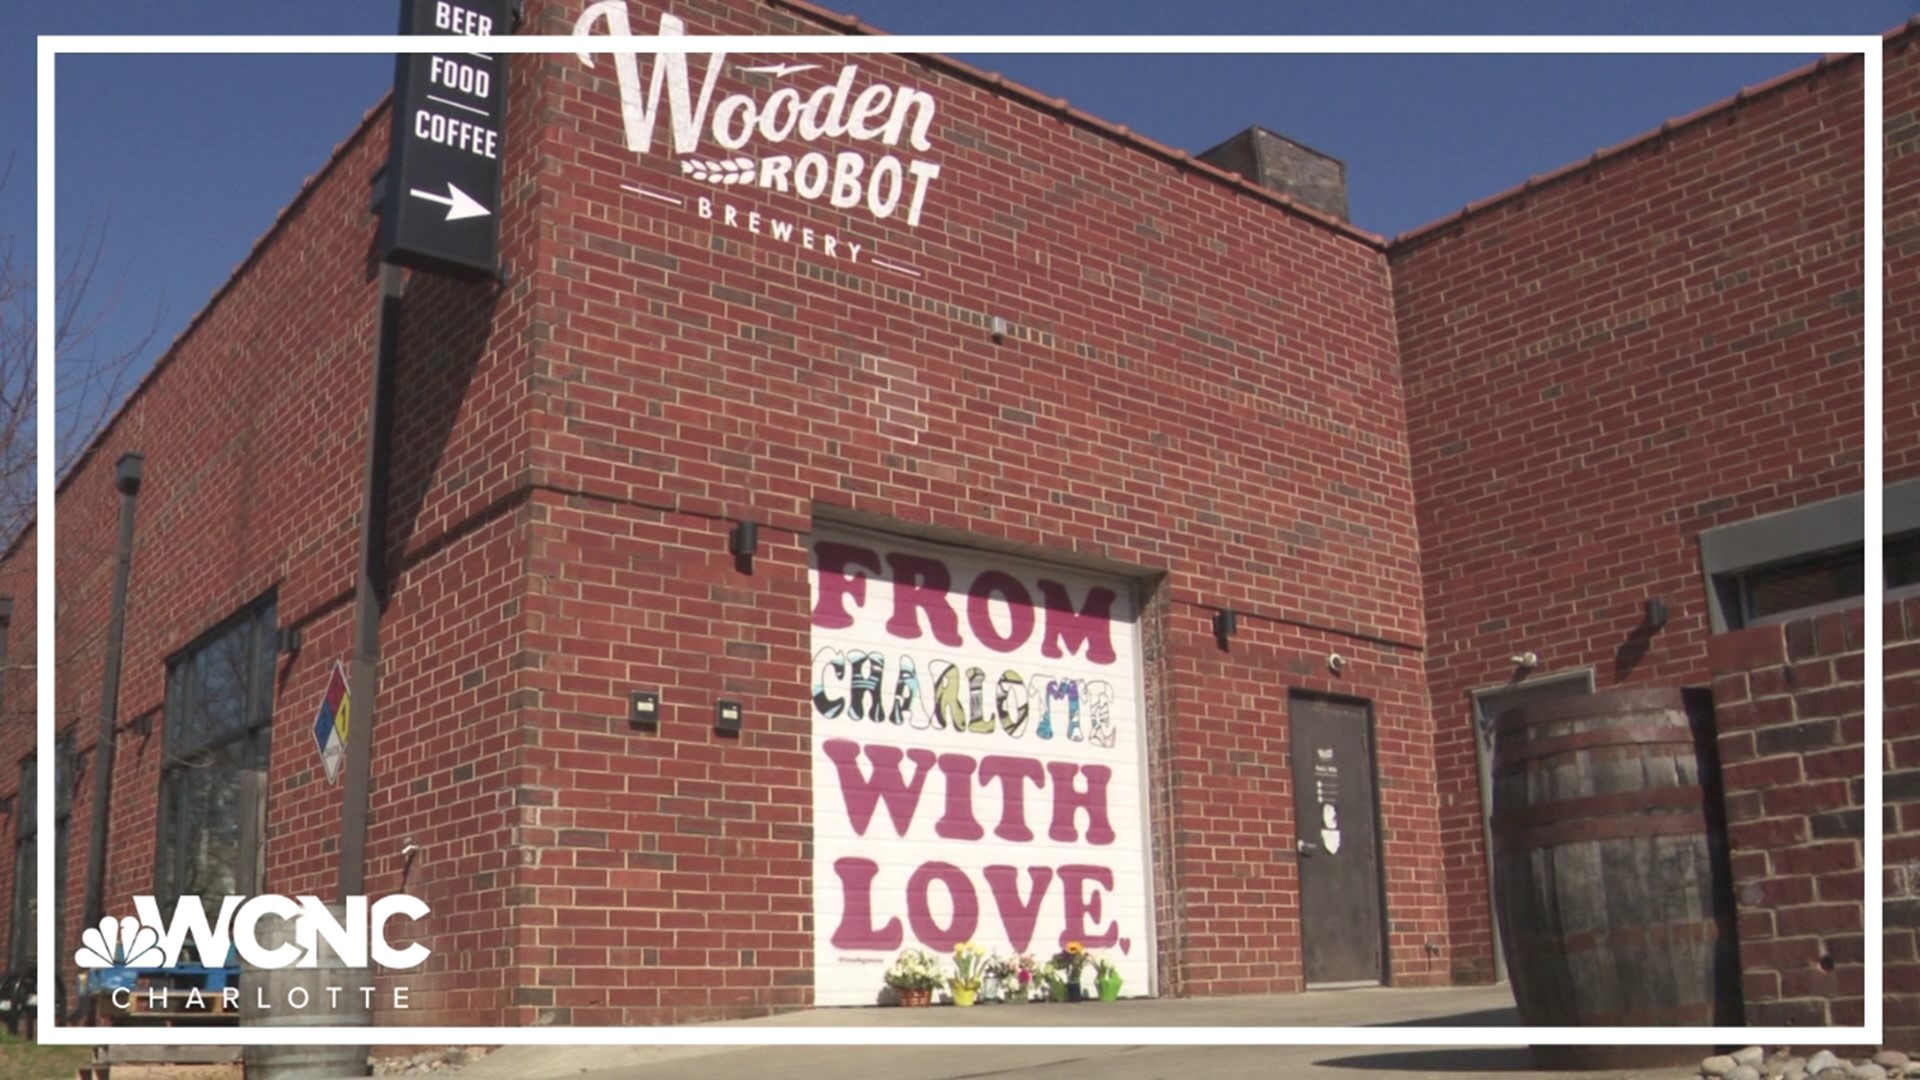 Popular Charlotte brewery Wooden Robot was fined $2,000 by the state after its owner fell to his death at the South End location earlier this year.